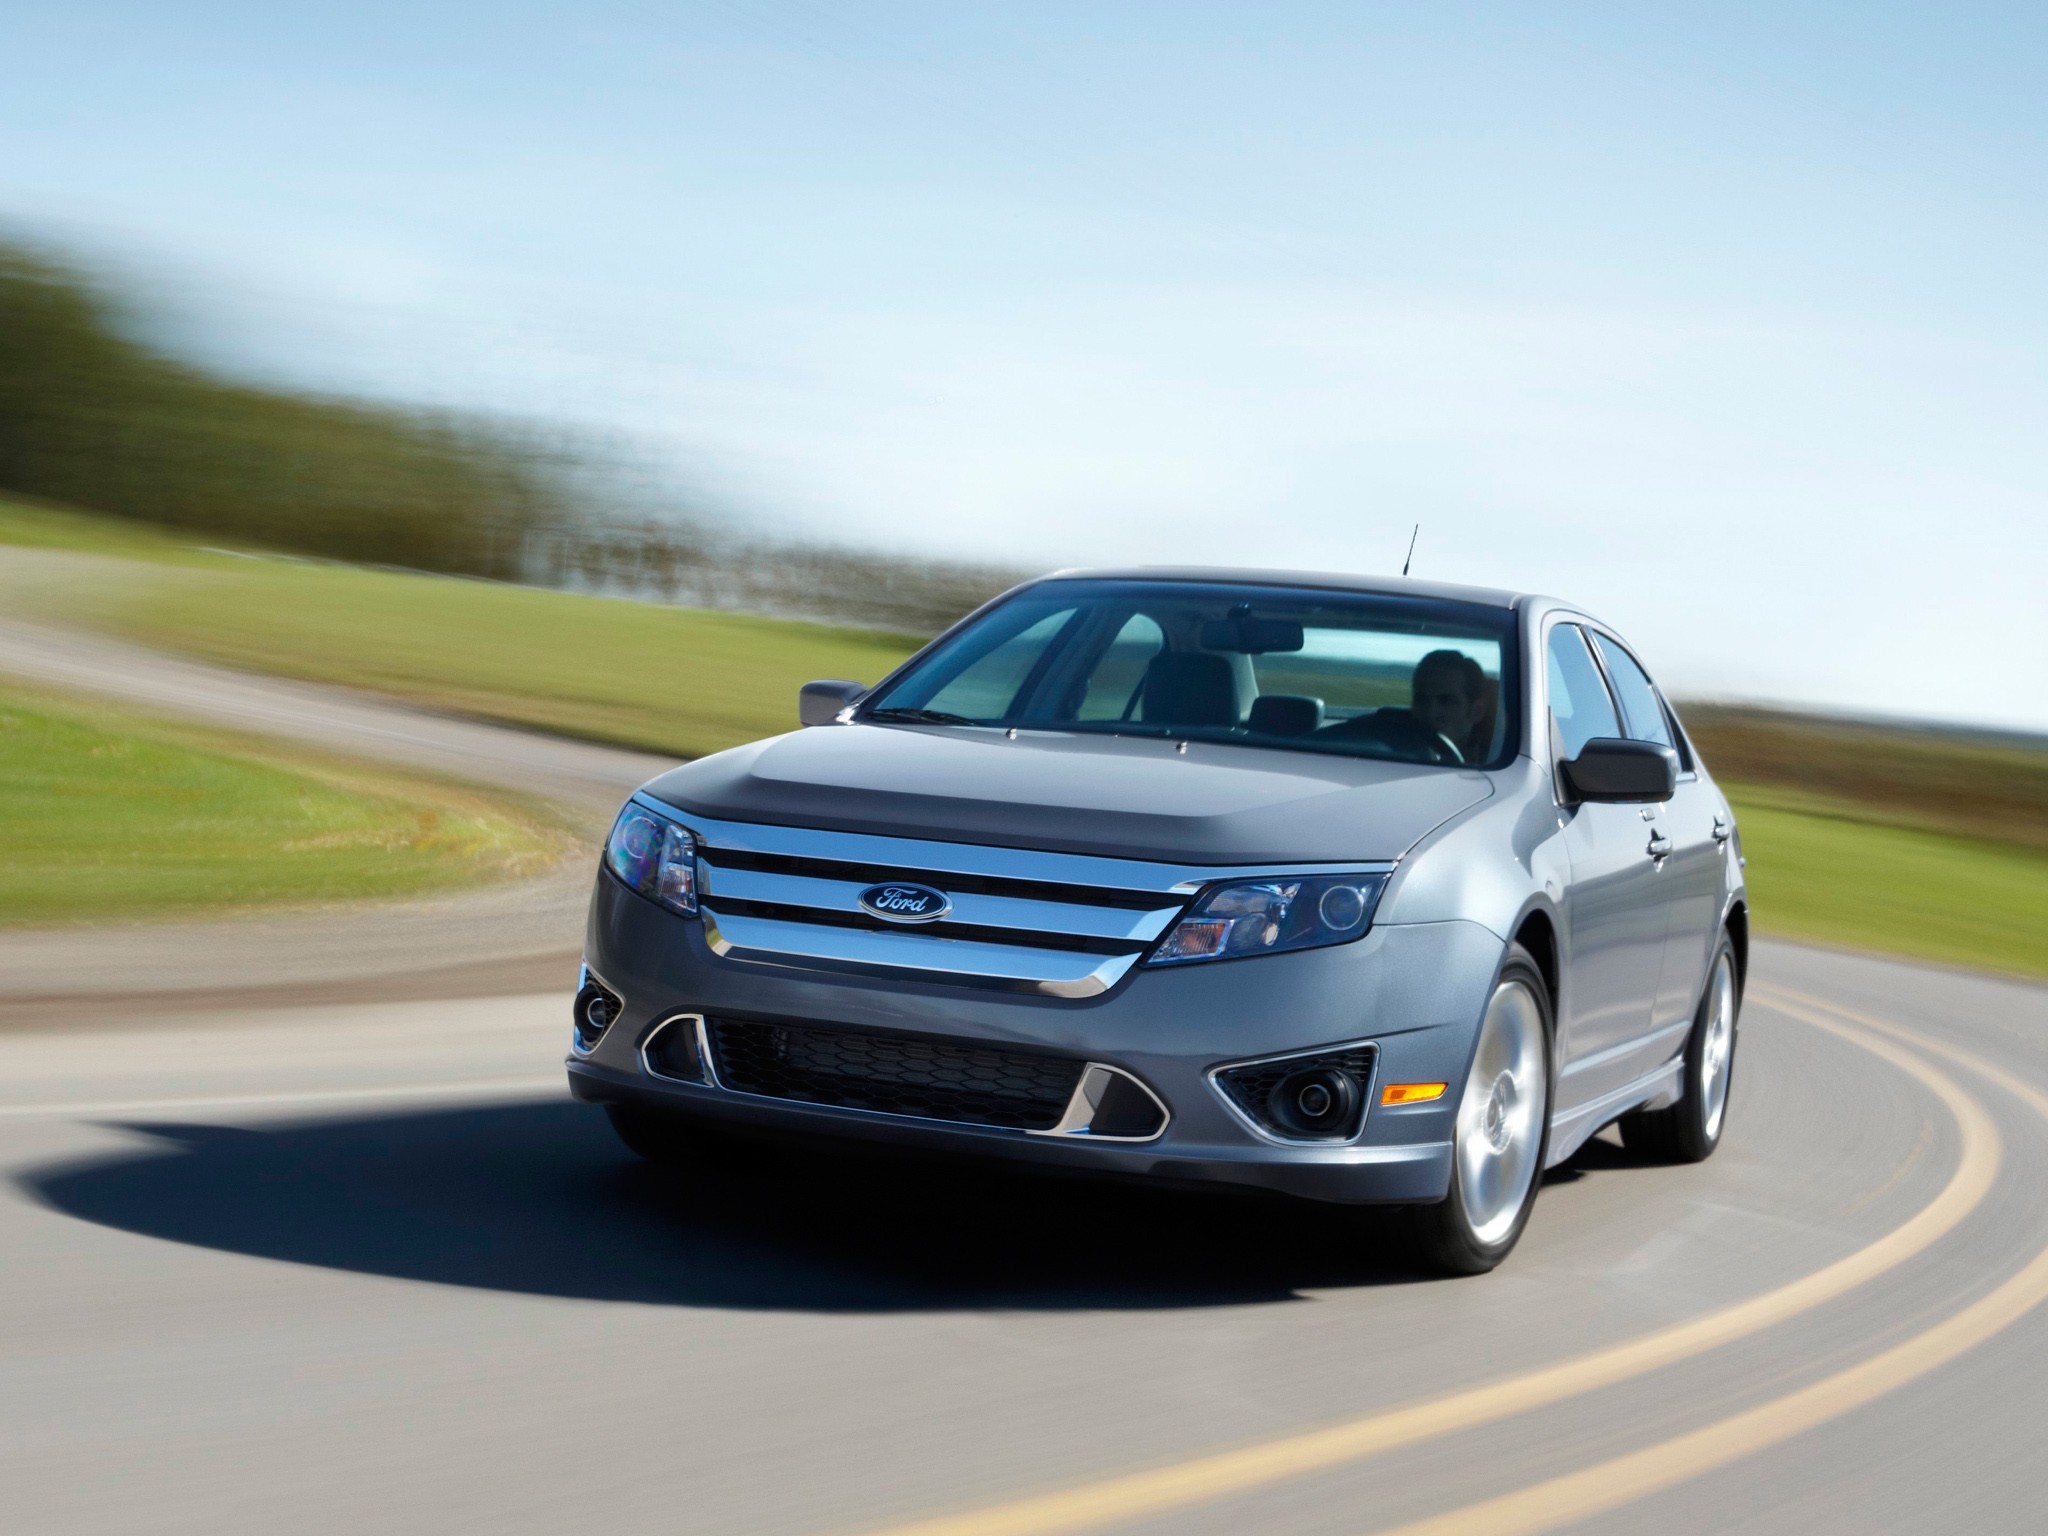 2008 Ford fusion ground clearance #5